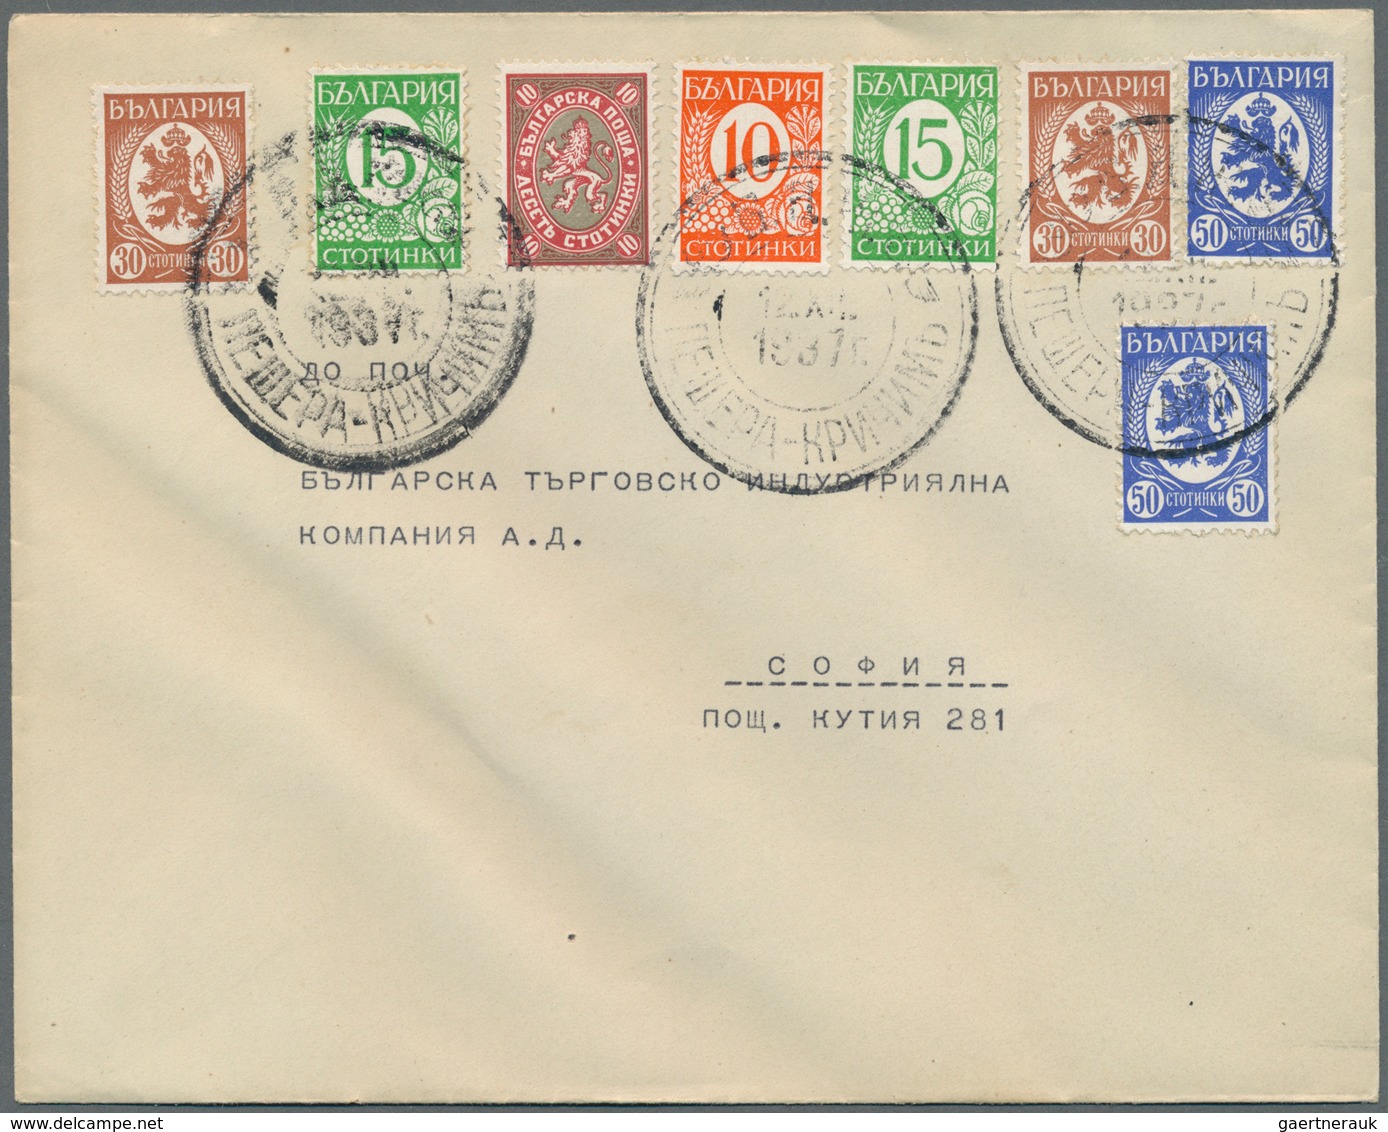 Bulgarien: 1938/1944, lot of apprx. 95 philatelic covers/cards, comprising many attractive entires,